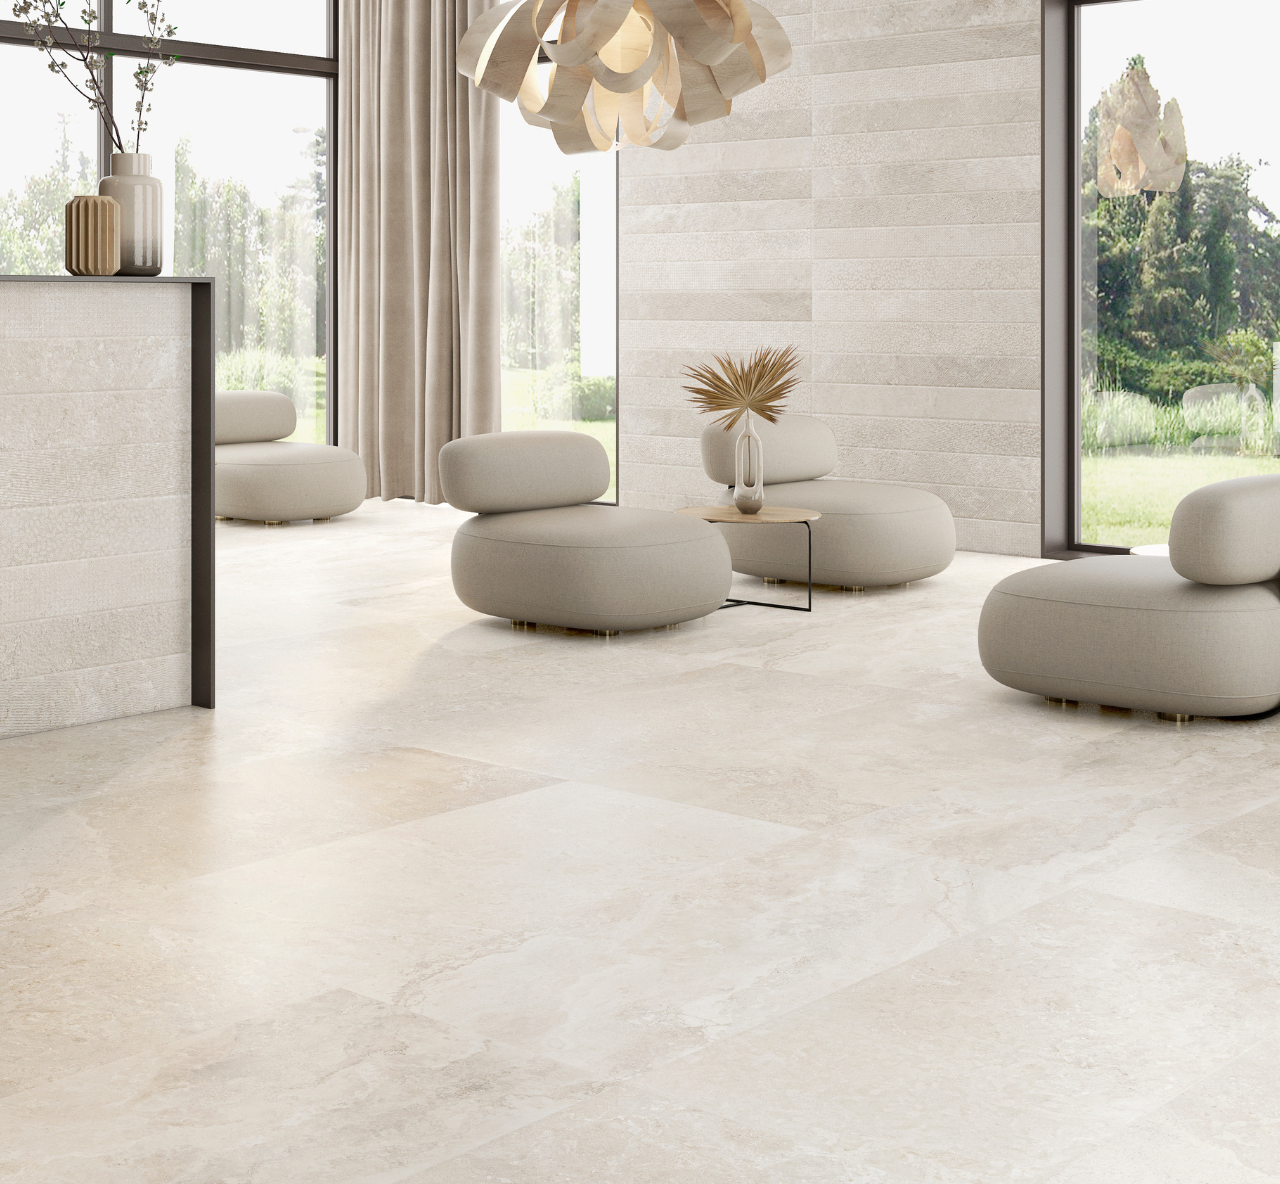 Tranquil Tones Almond Stone Effect Large Format Floor Tiles